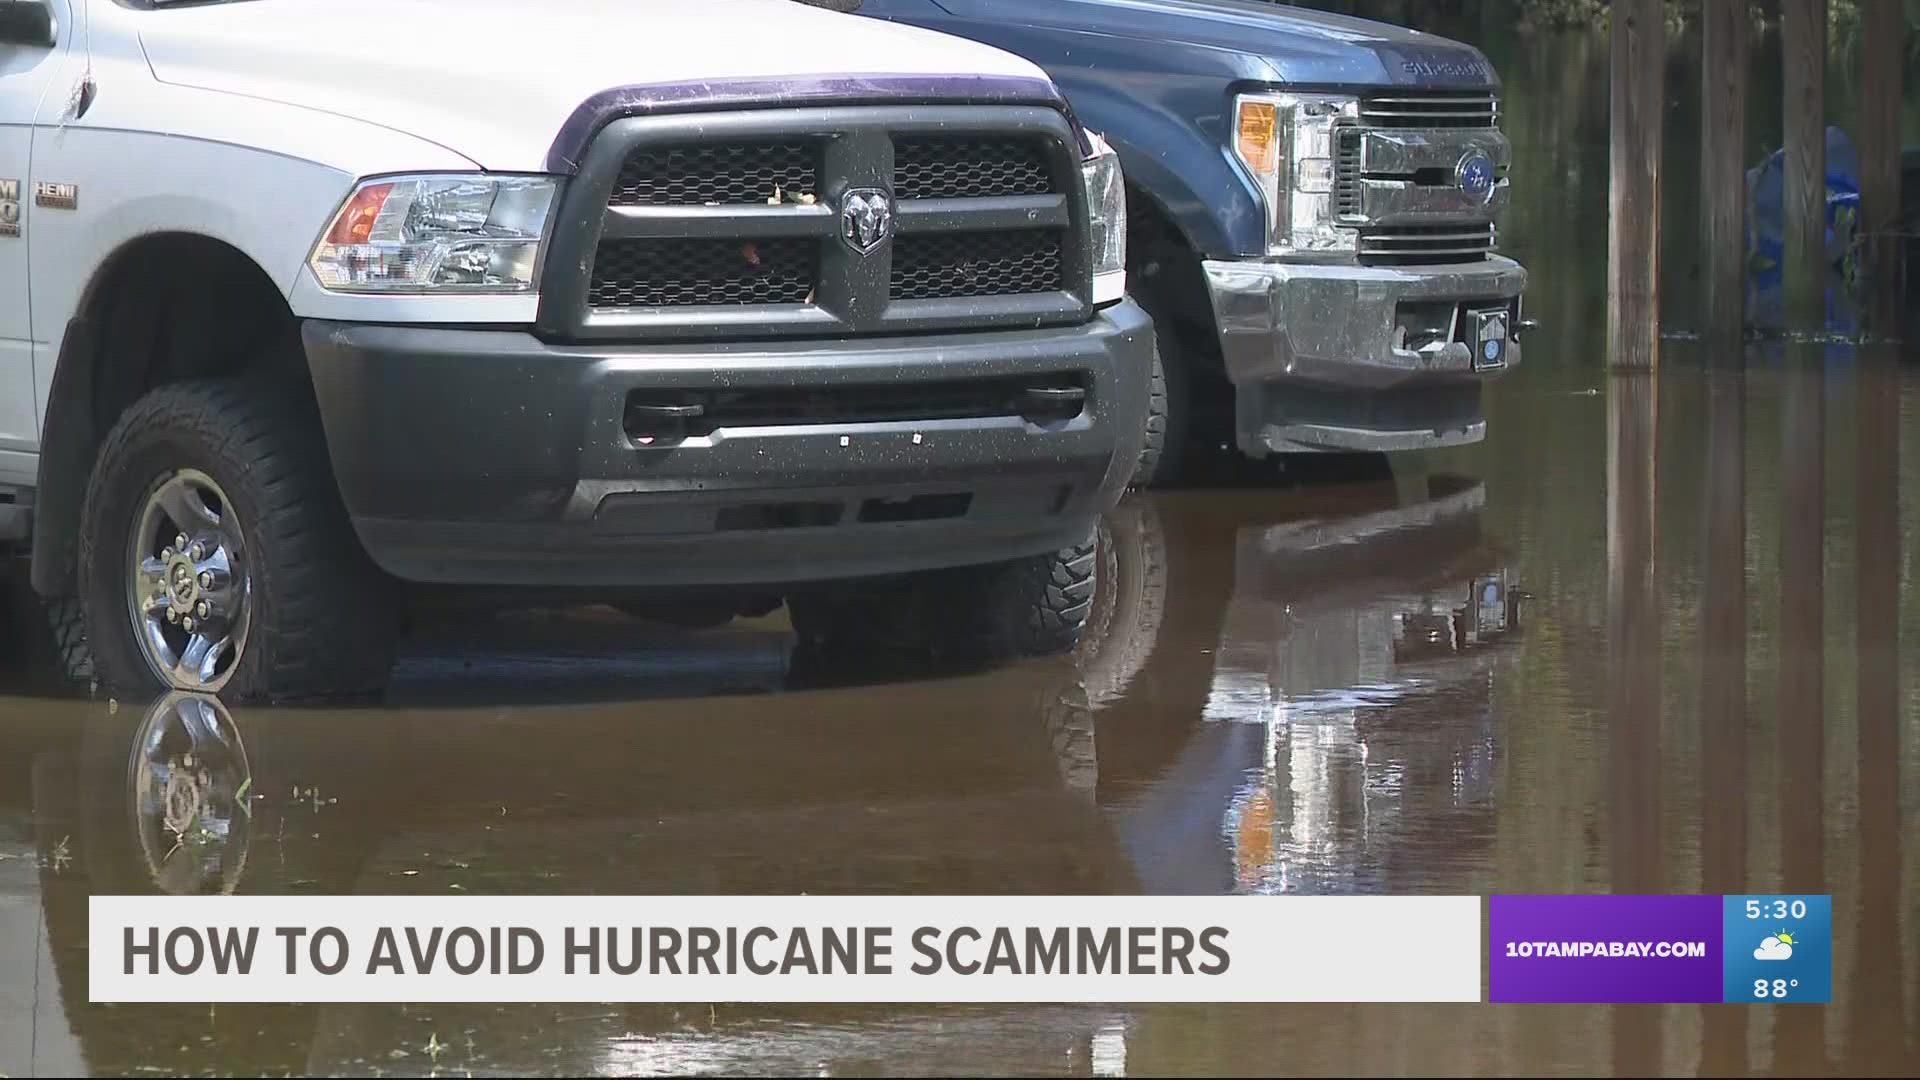 For those rebuilding following Hurricane Ian's impacts, there's a sense of urgency to get the work started, and scammers are taking advantage.